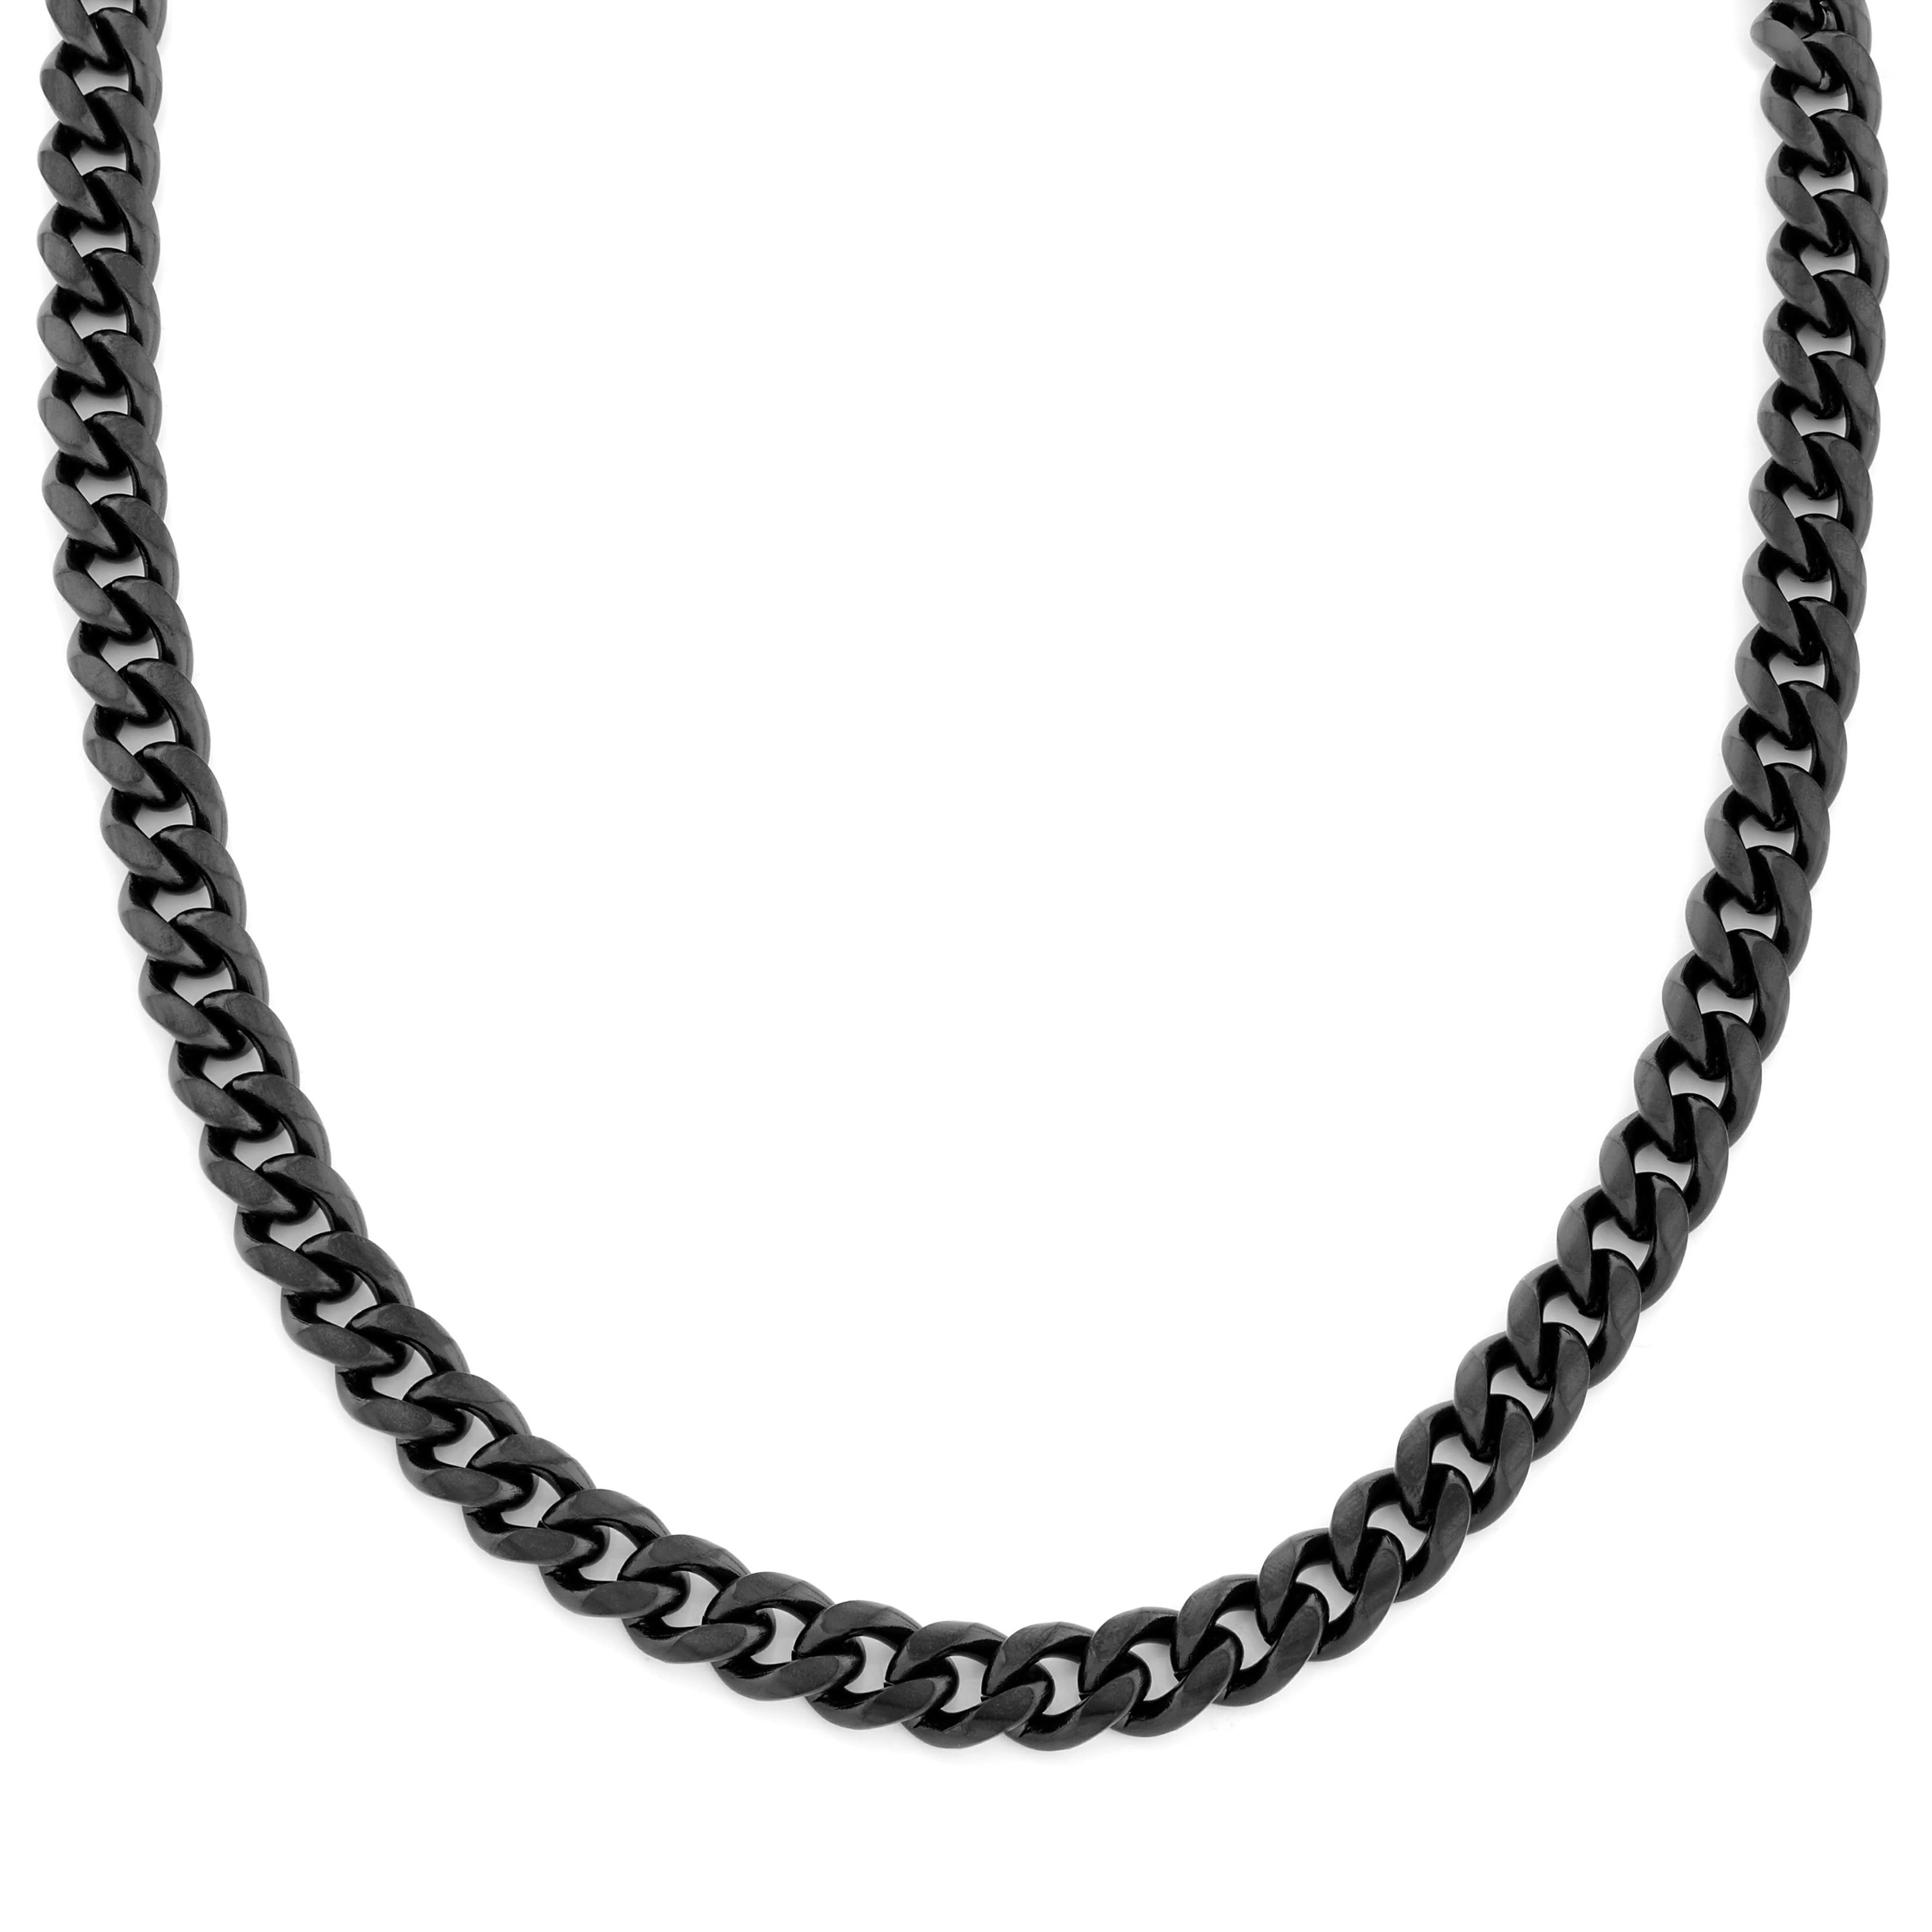 10 mm Black Stainless Steel Cuban Chain Necklace